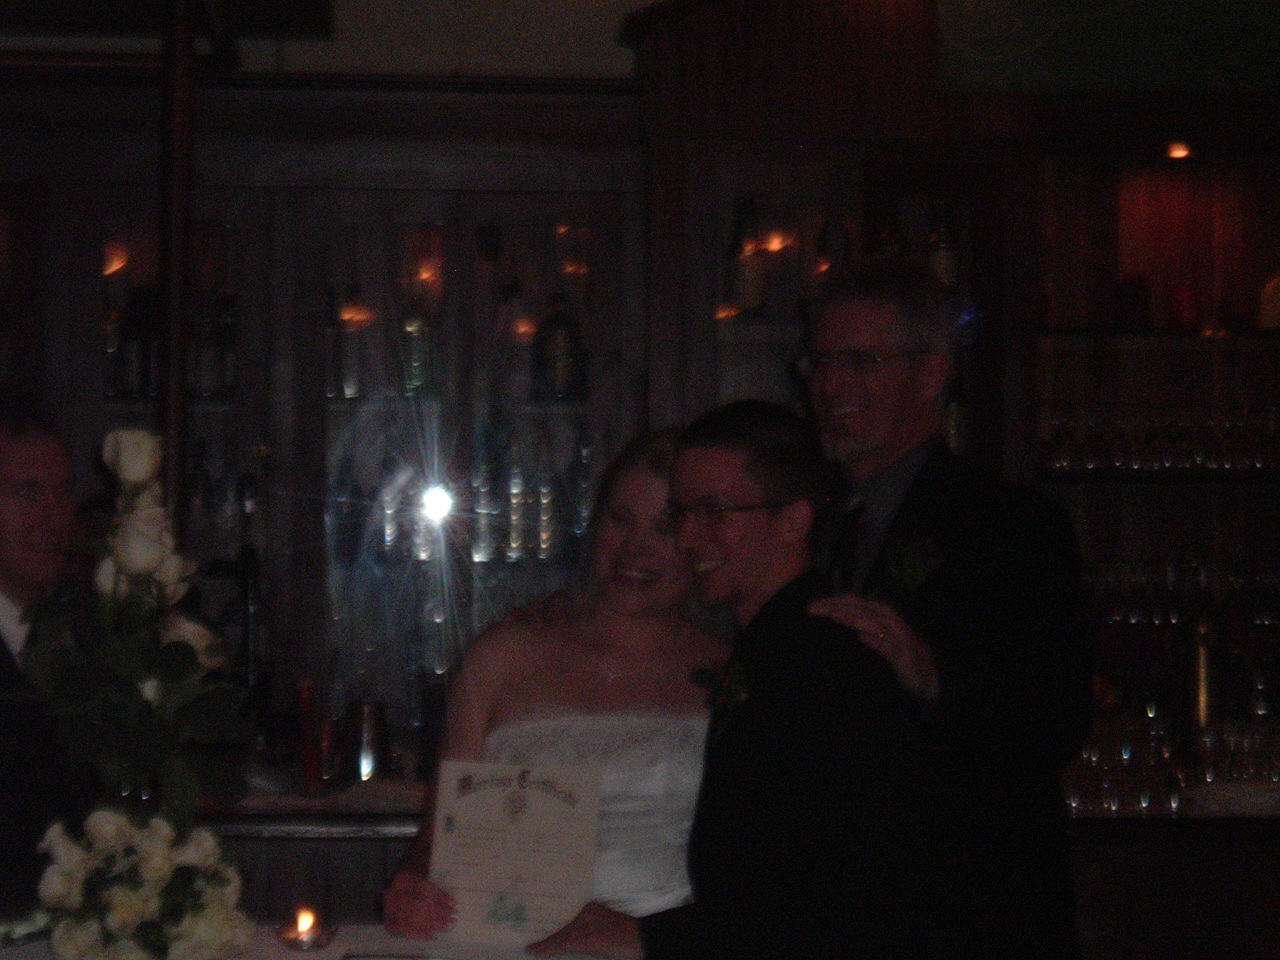 [The+Marriage+Certificate.JPG]